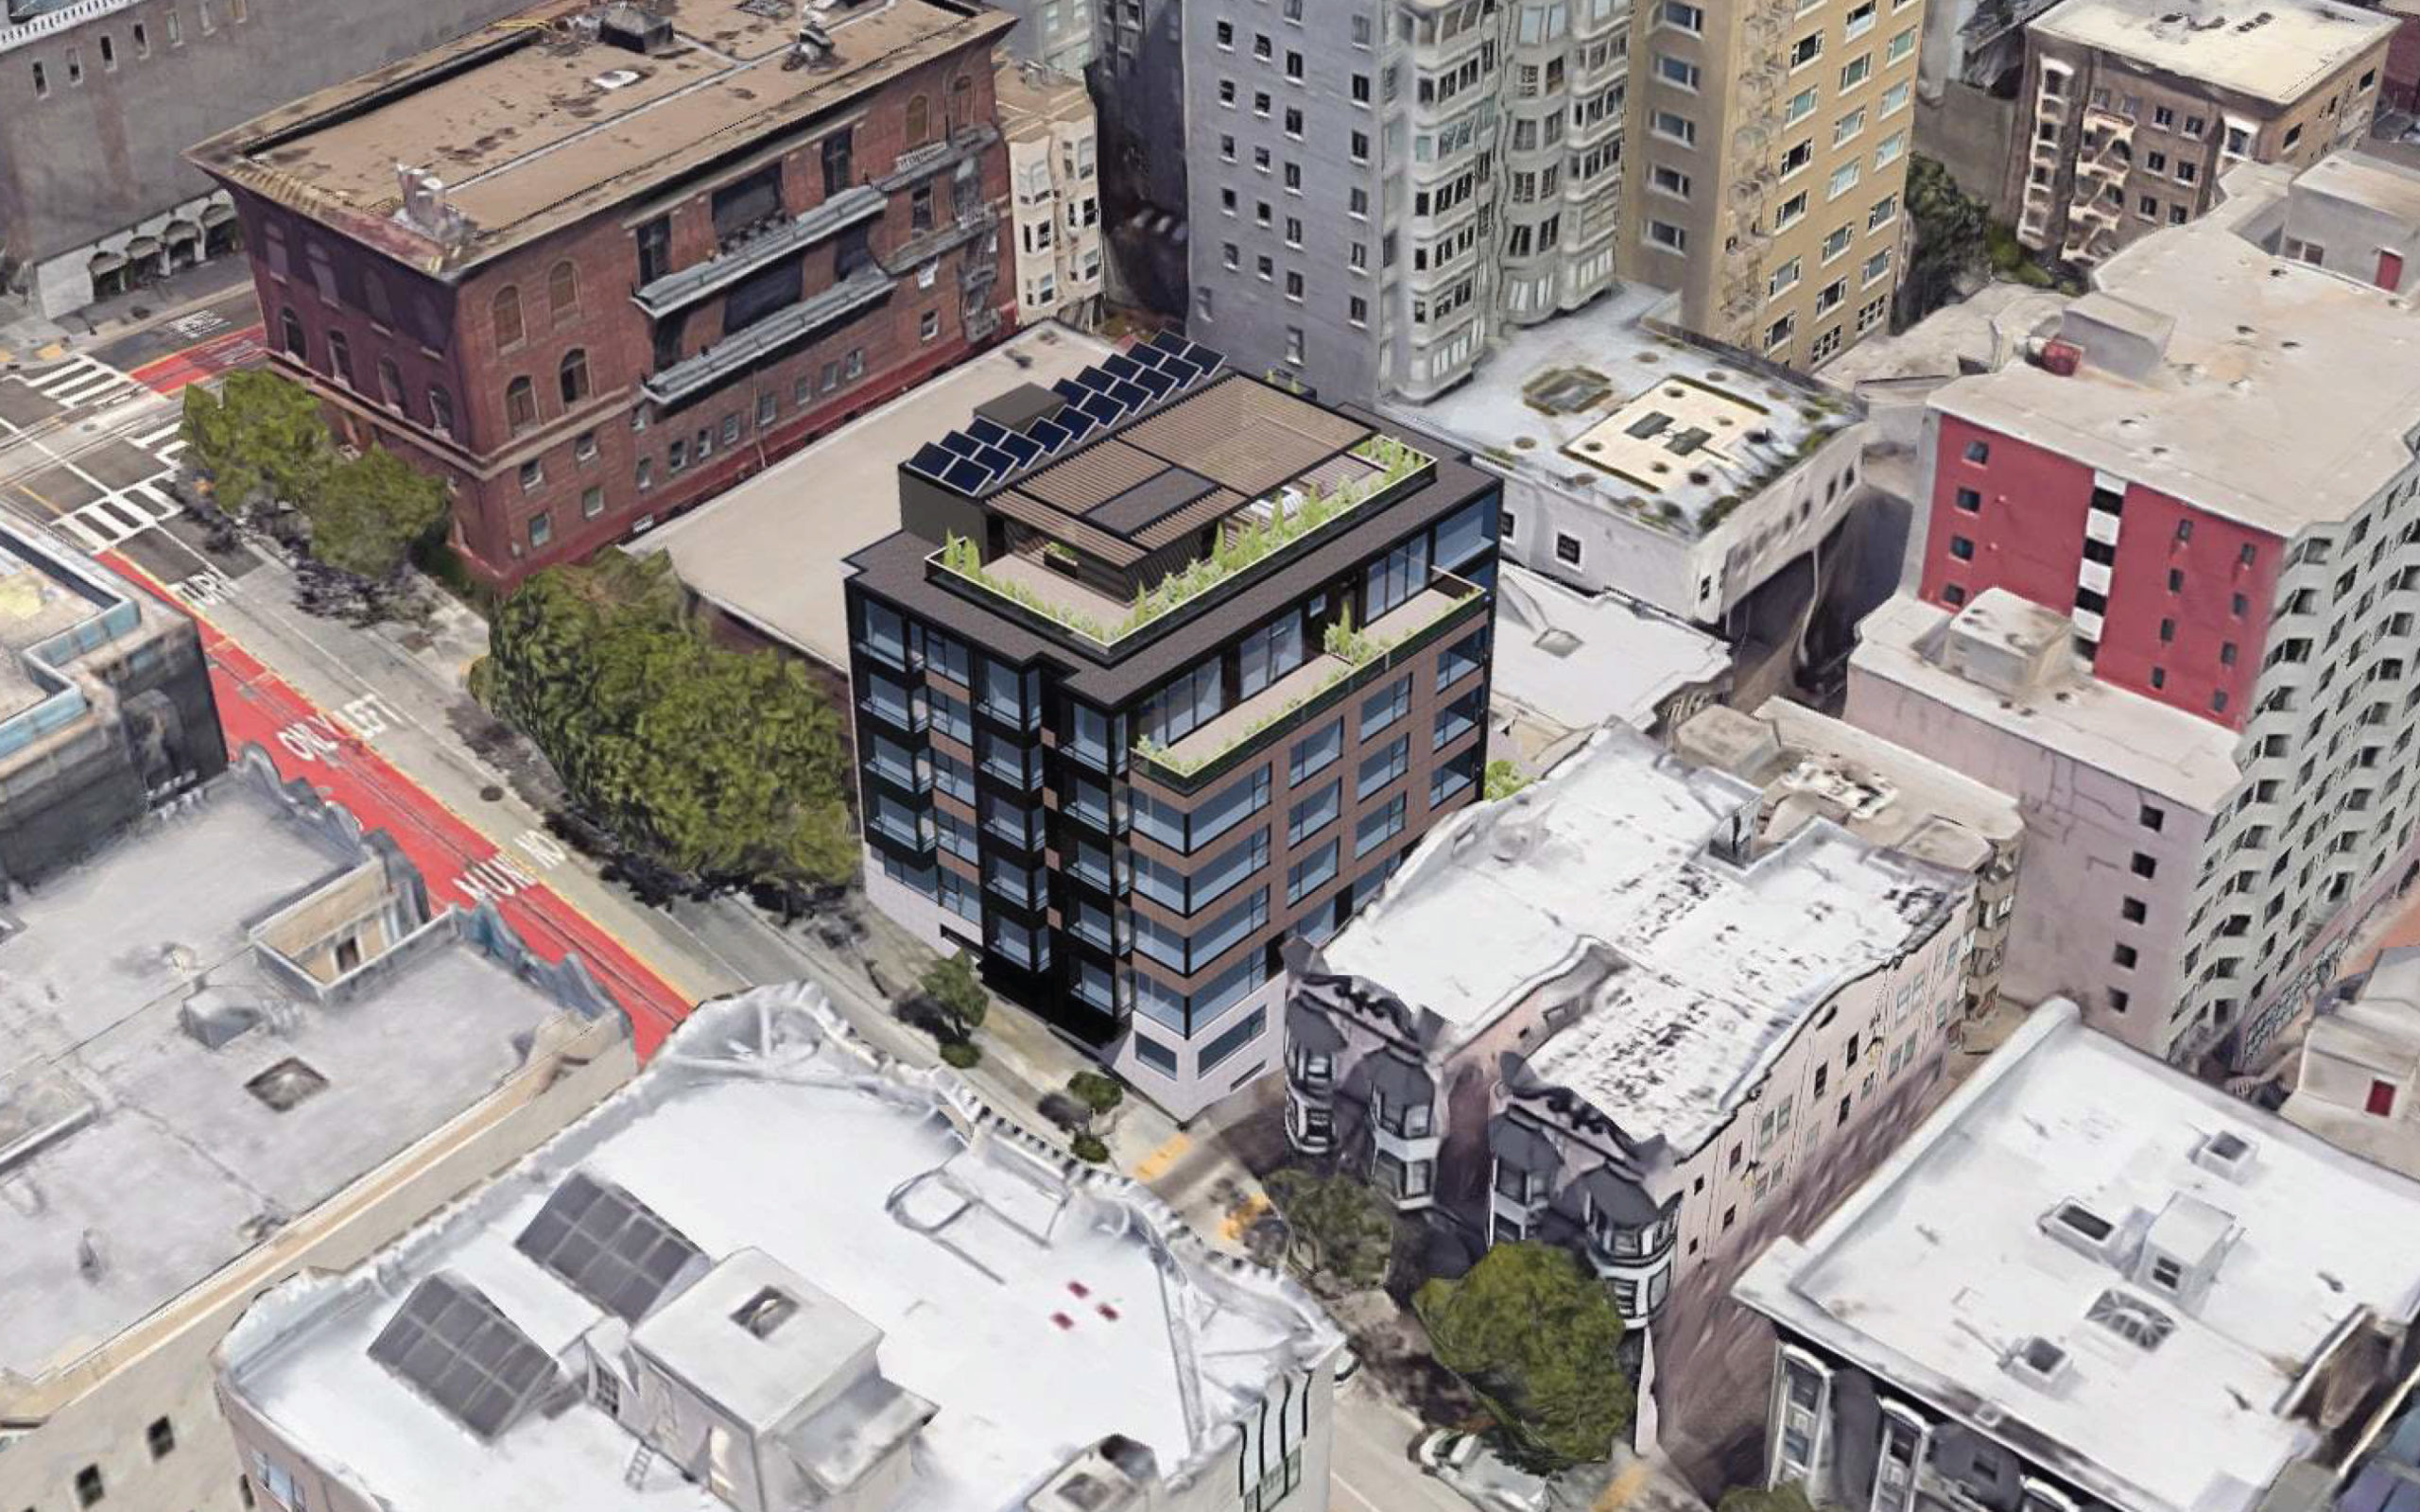 842 California Street aerial perspective, rendering by Cass Calder Smith